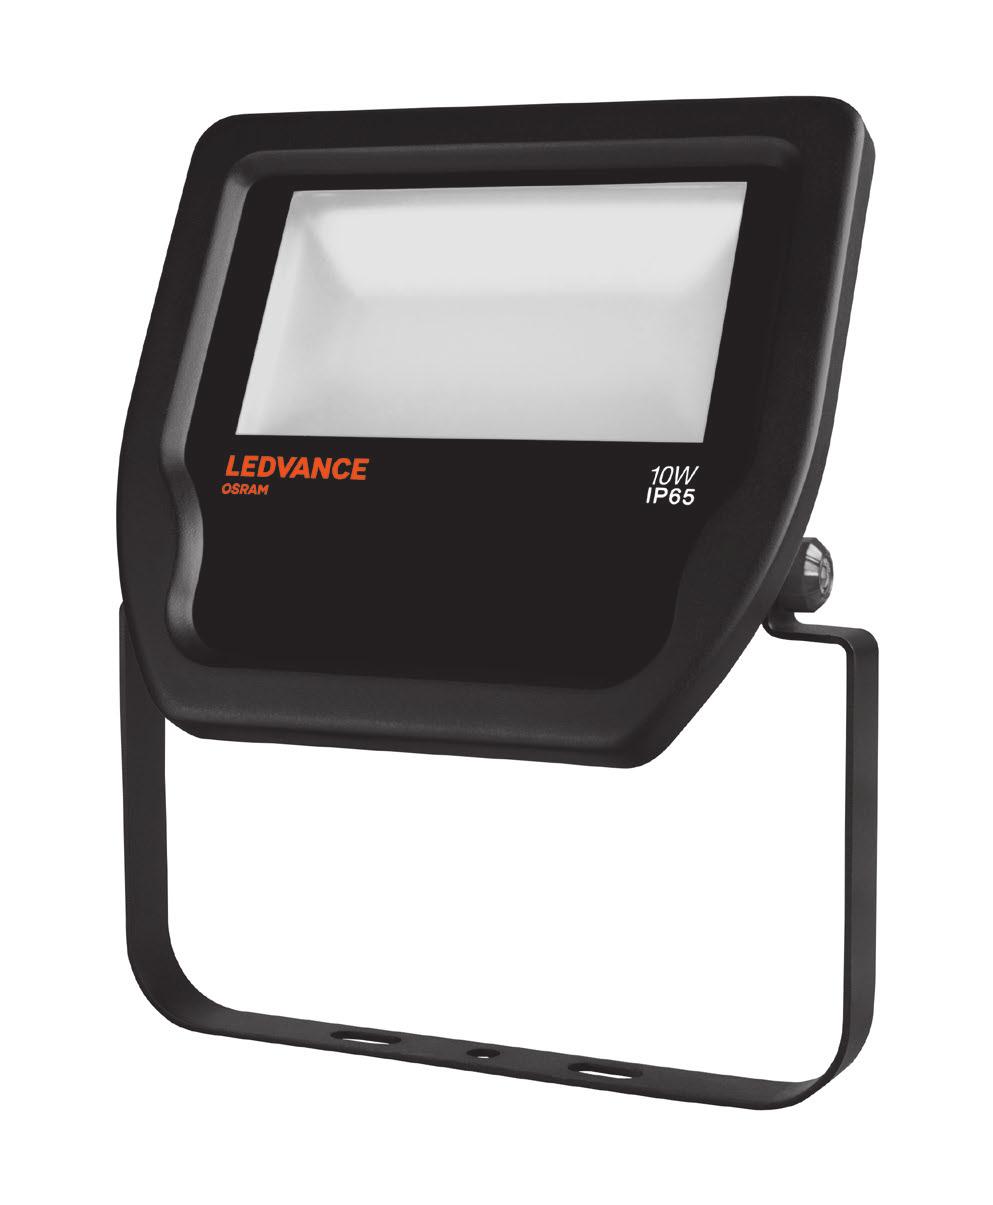 4. LEDVANCE Floodlight LED The LEDVANCE Floodlight LED features frosted tempered glass with an impact rating of IK07 (reinforced) in a compact and robust package.